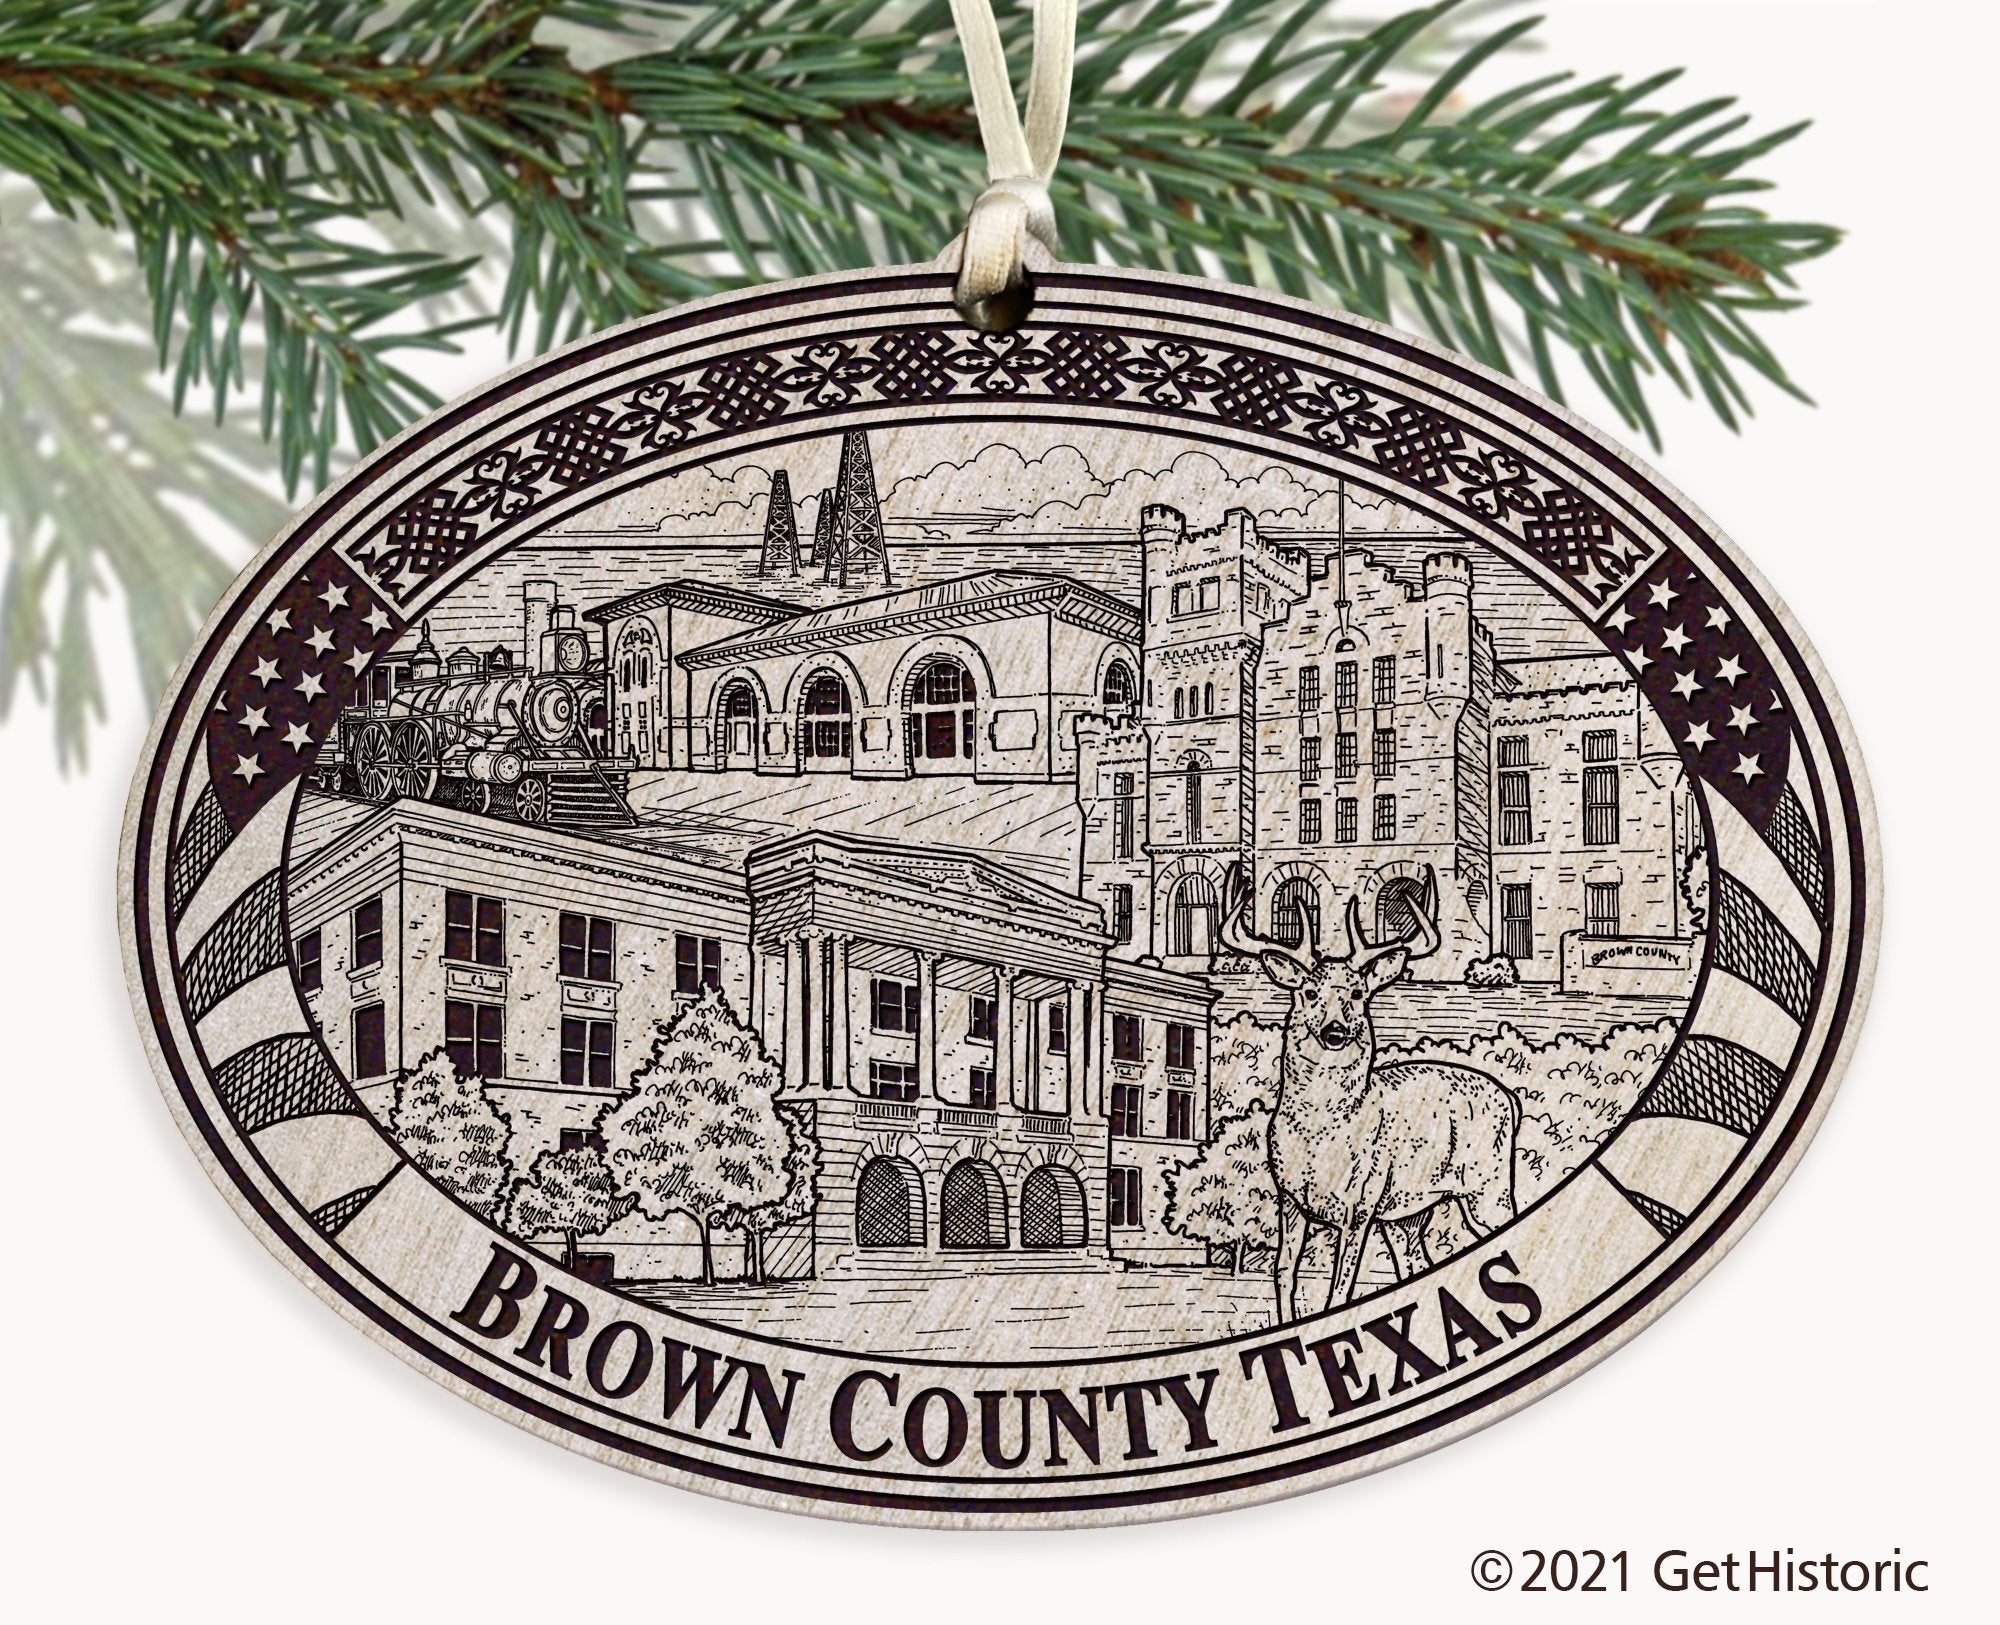 Brown County Texas Engraved Ornament